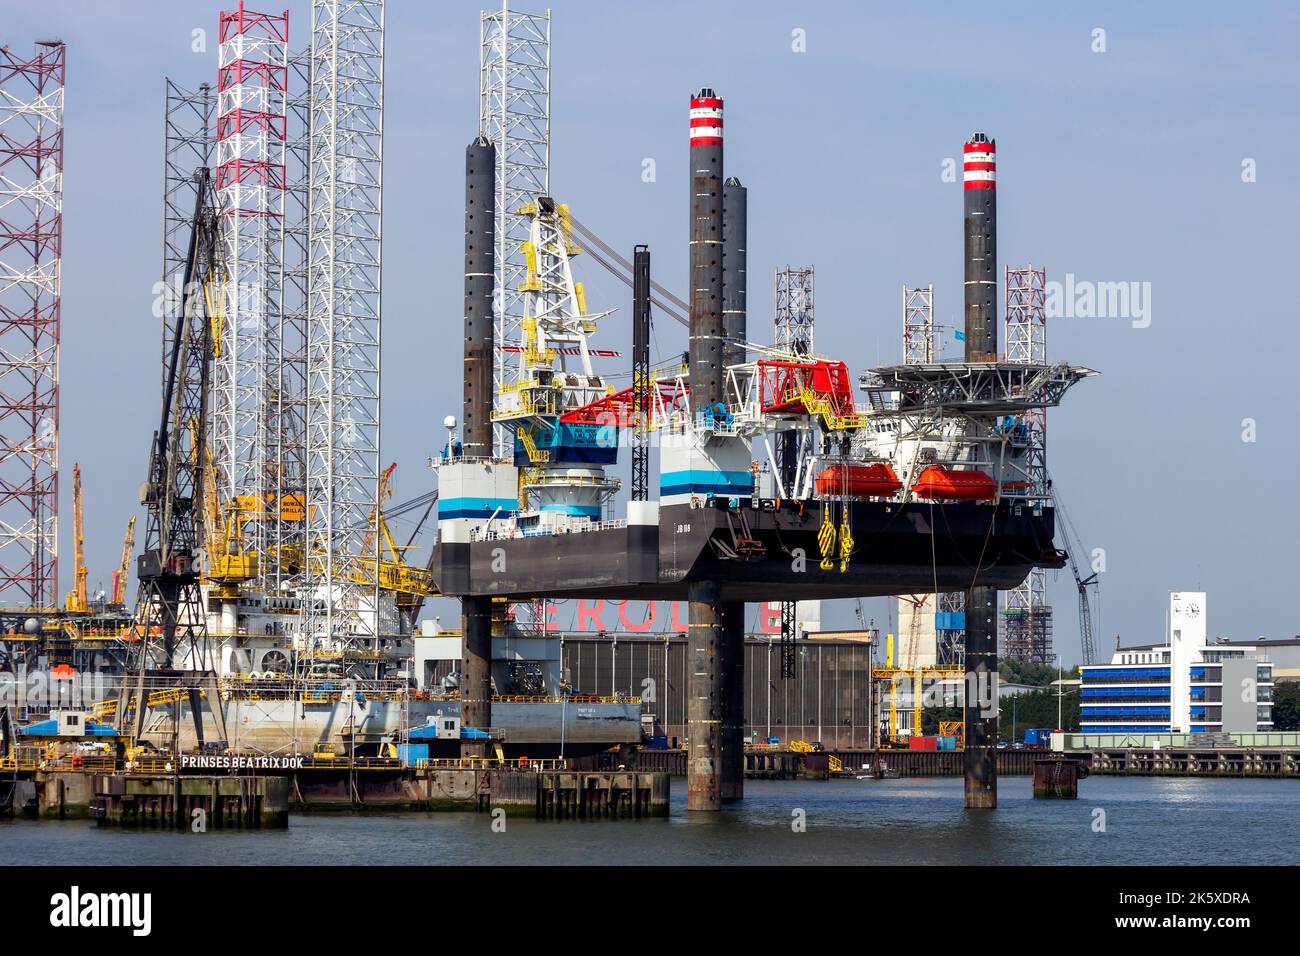 Self Elevating Platform JB-118 rig docked in the Port of Rotterdam, The Netherlands - August 1, 2014. Stock Photo